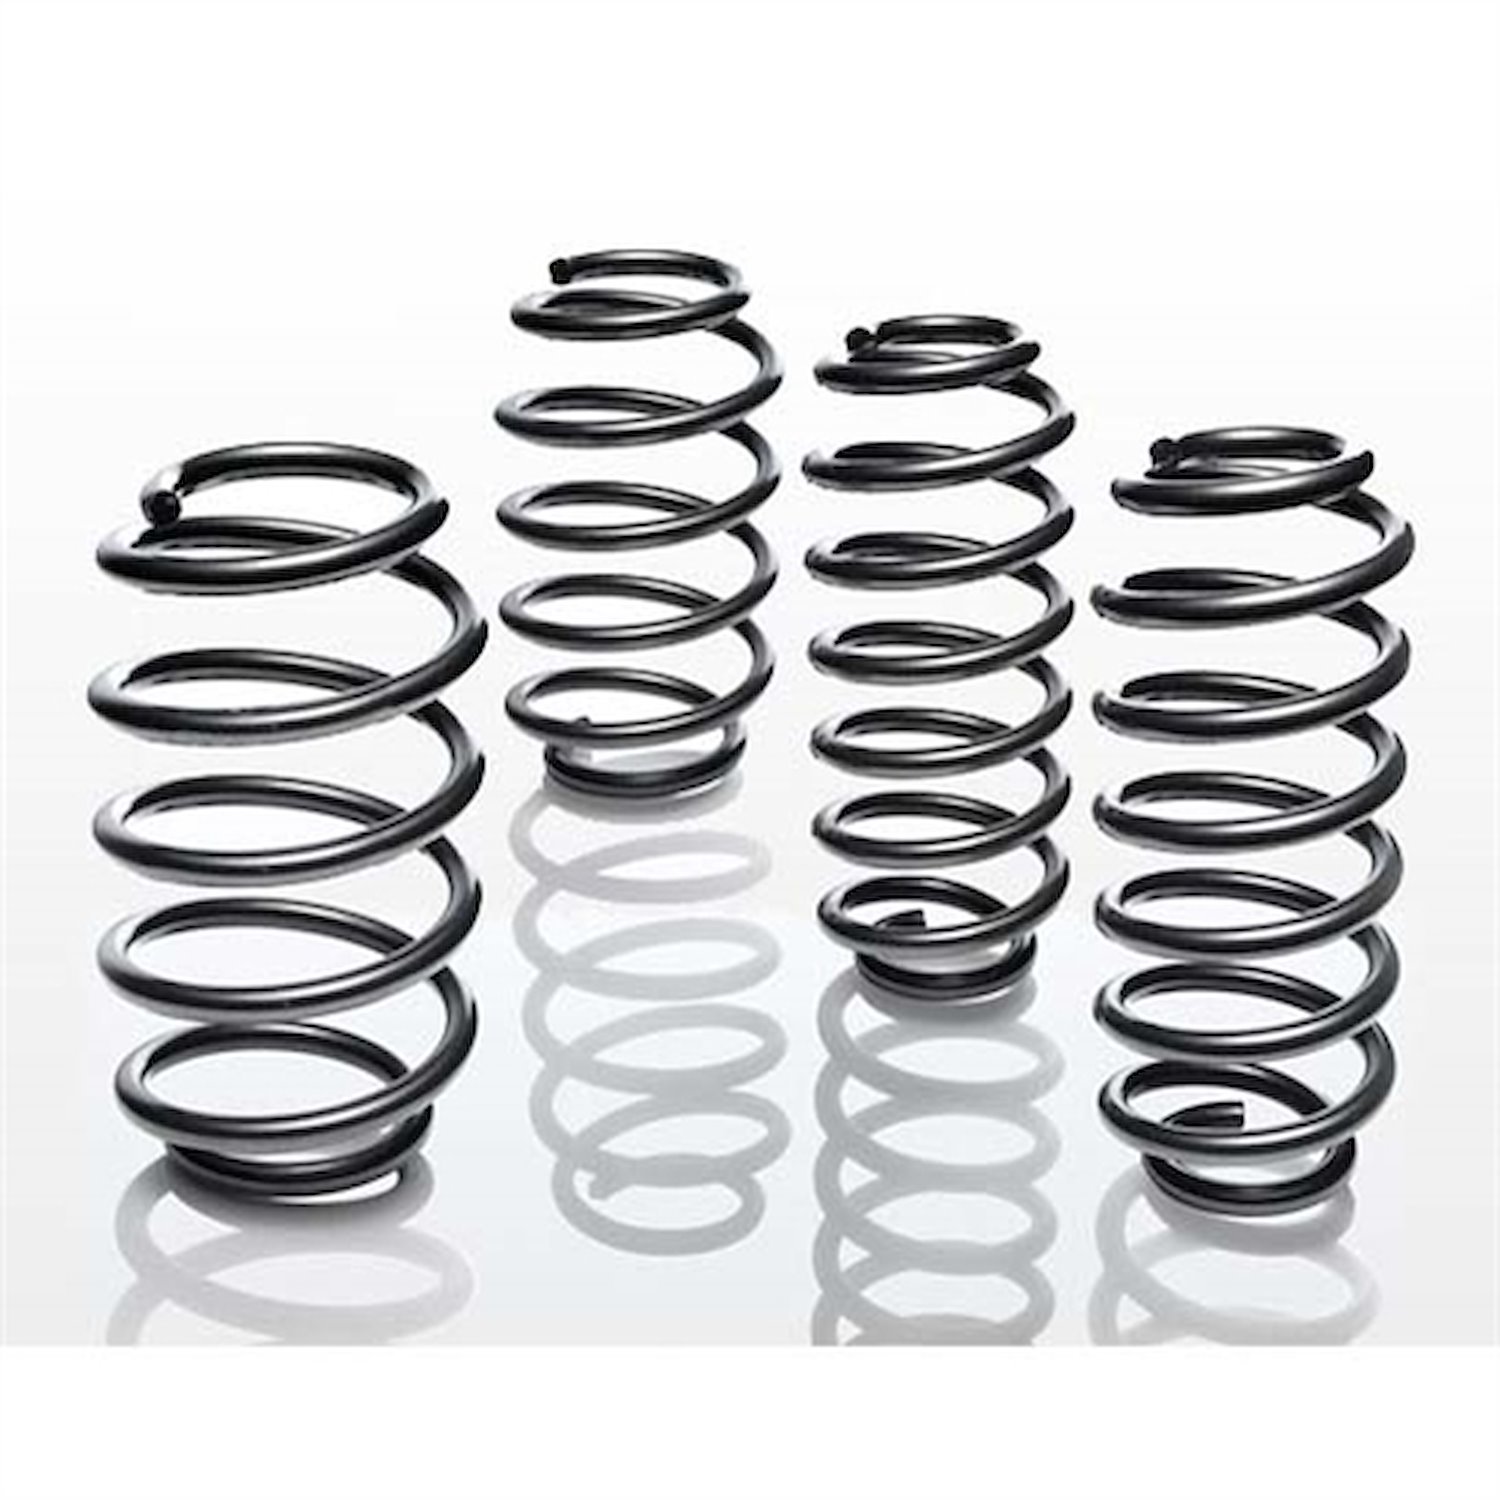 4244.140 Pro-Kit Lowering Springs 2009-2015 for Hyundai Genesis Coupe 2.0 Turbo - 1.200 in Front/1.300 in. Rear Drop